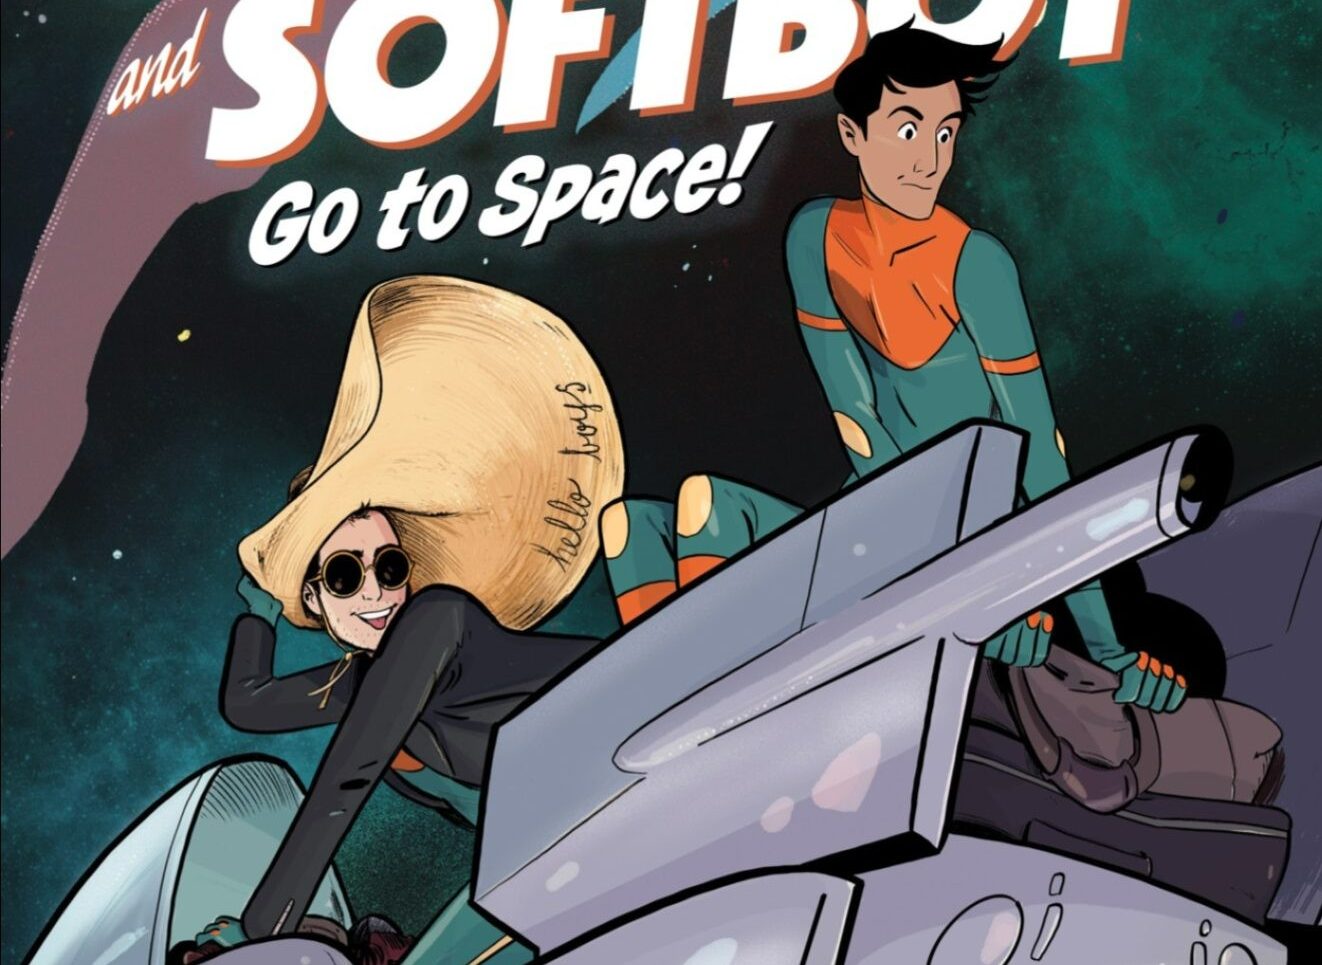 'Rockstar & Softboy Go To Space' is a deliciously queer story of friendship, adventure, and the power of community